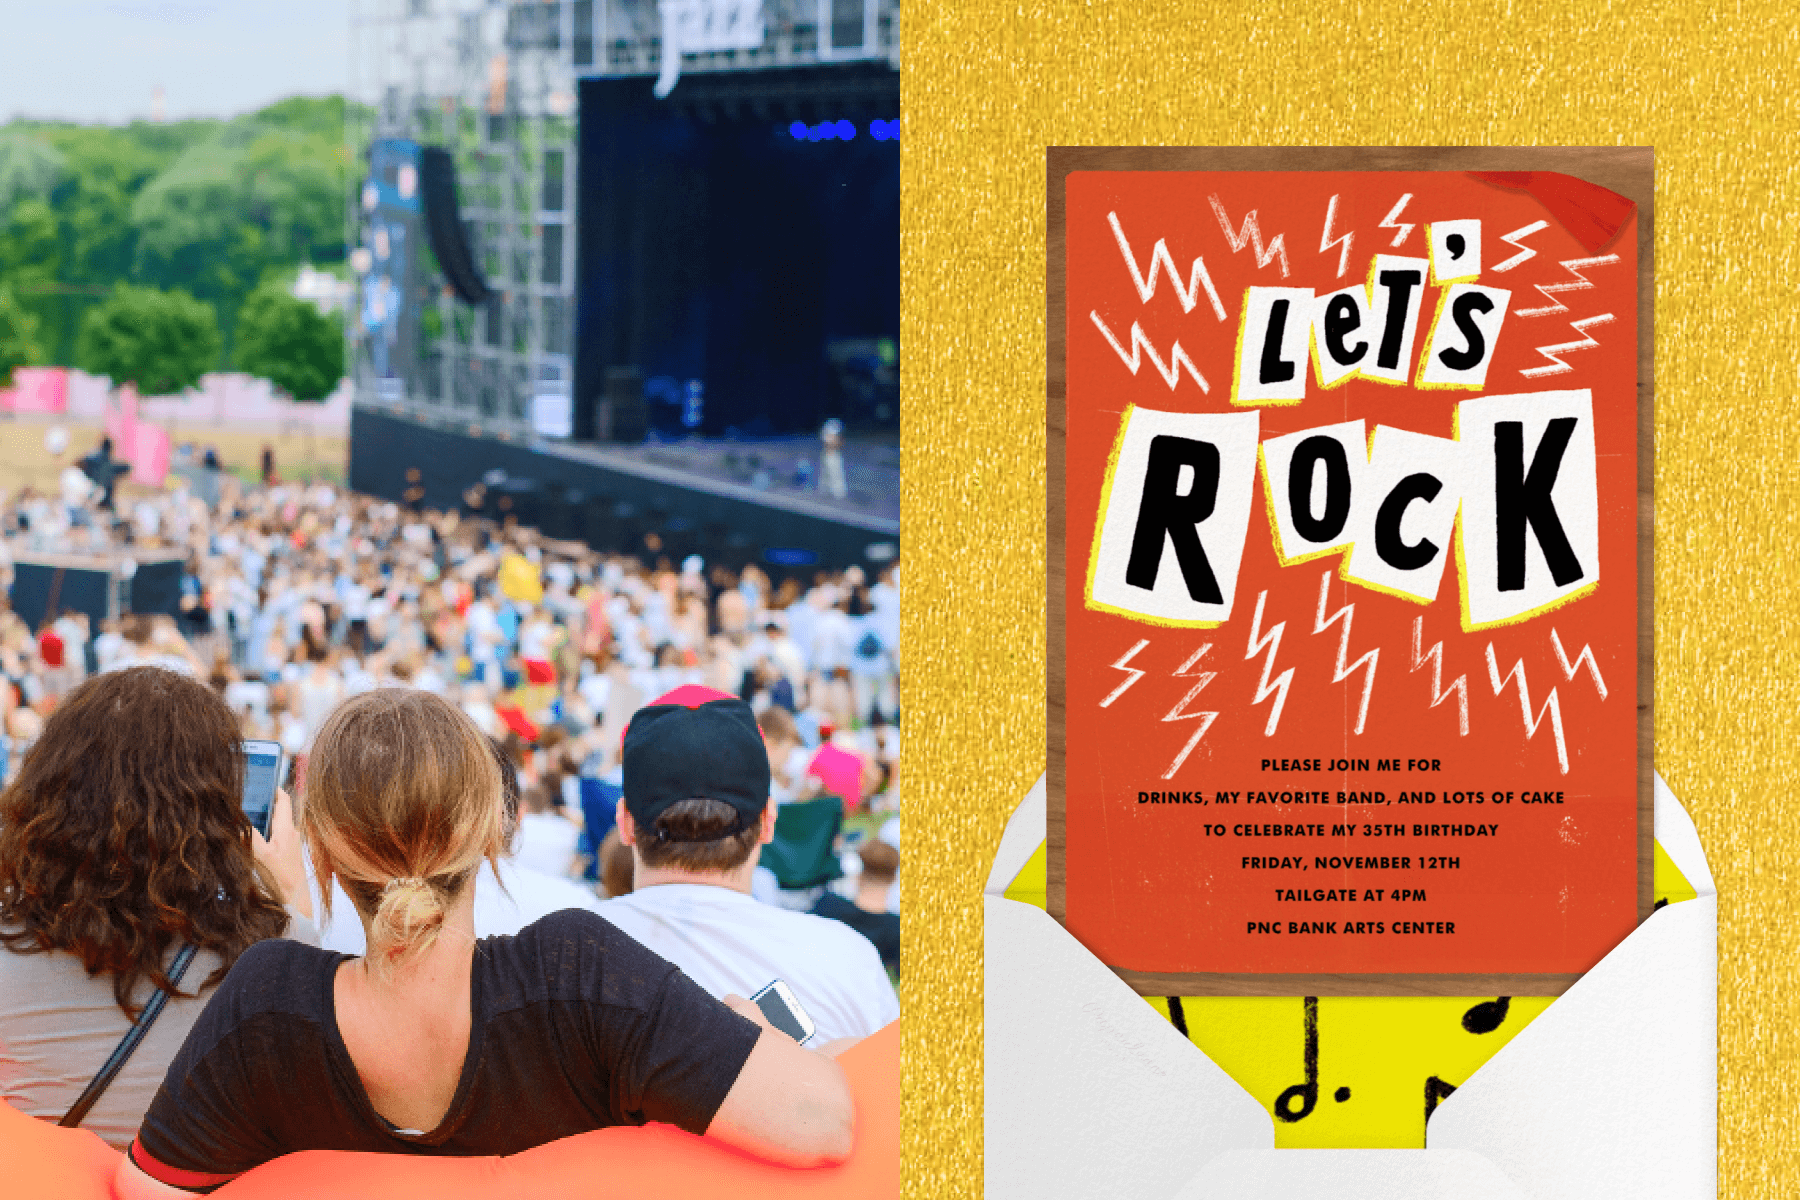 Left: The backs of people watching a show at what appears to be an outdoor music festival. Right: An orange 35th birthday invitation with the words “Let’s rock” written in letters of various sizes with lightning bolt doodles around them on a gold glitter backdrop.